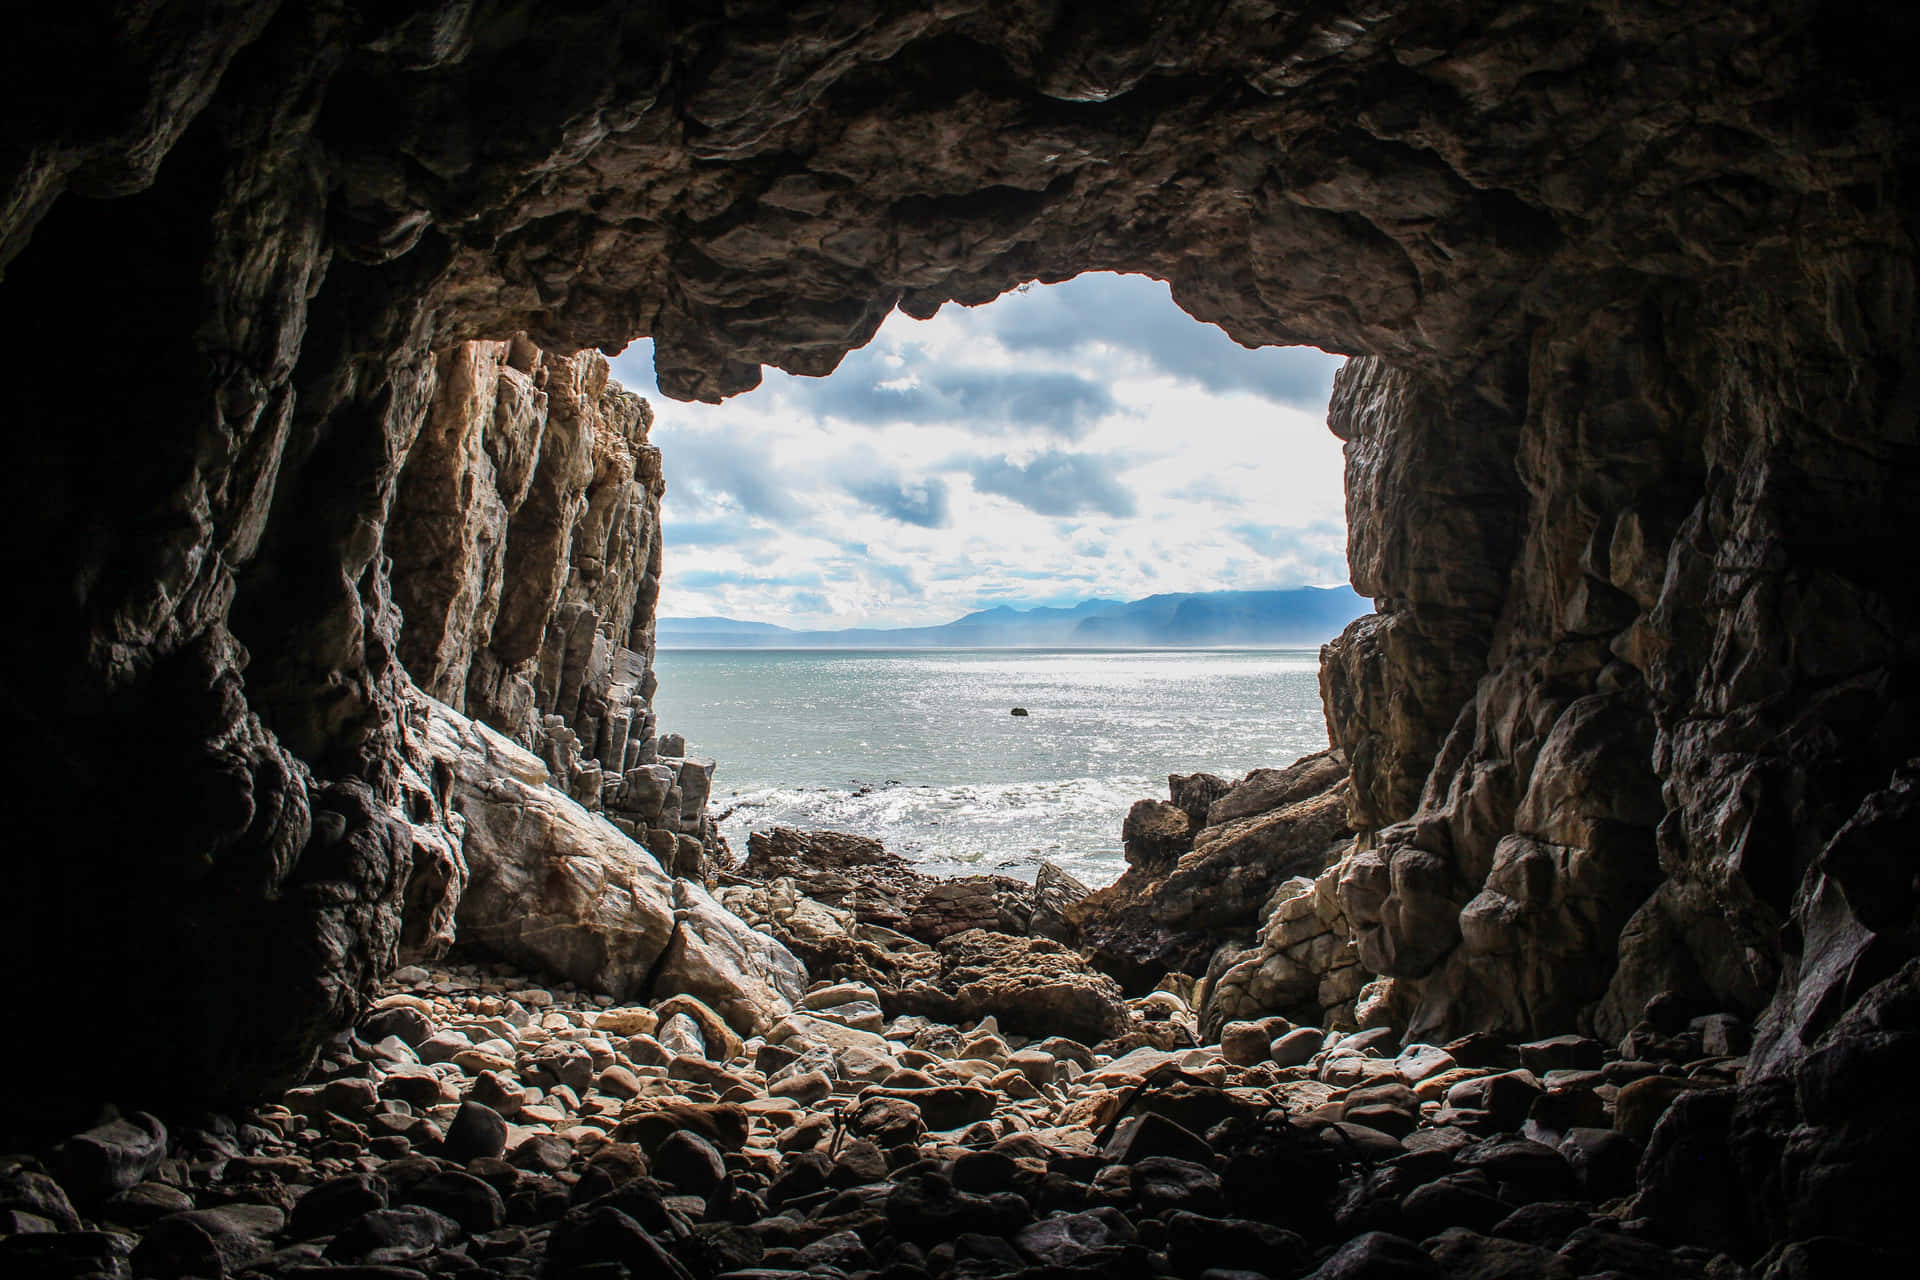 A Cave With A View Of The Ocean